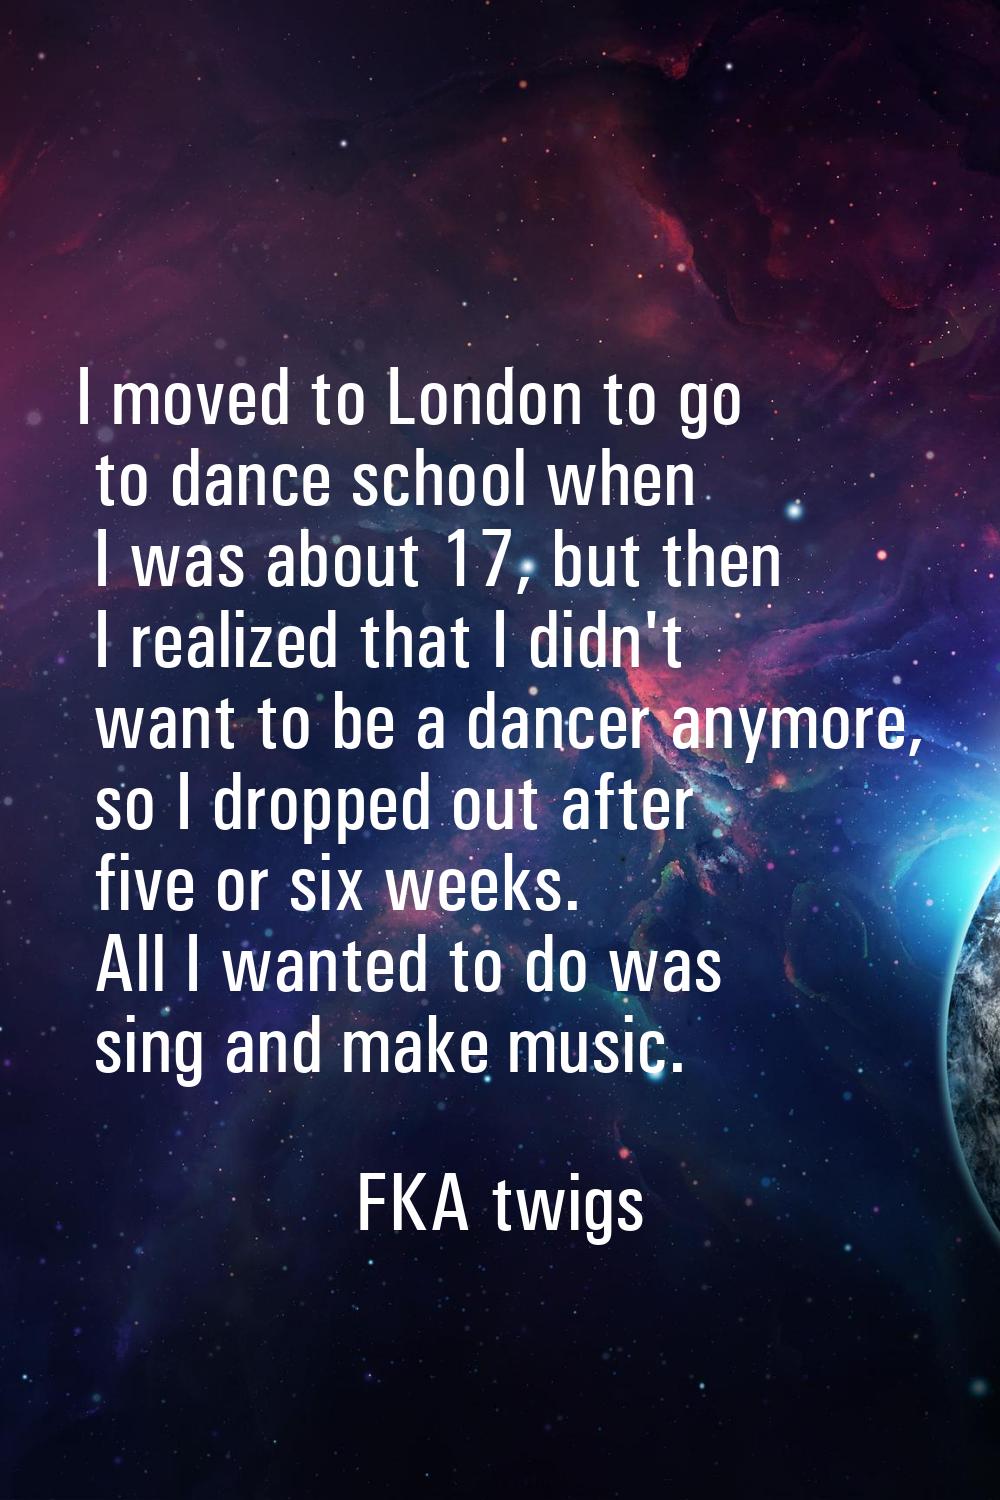 I moved to London to go to dance school when I was about 17, but then I realized that I didn't want